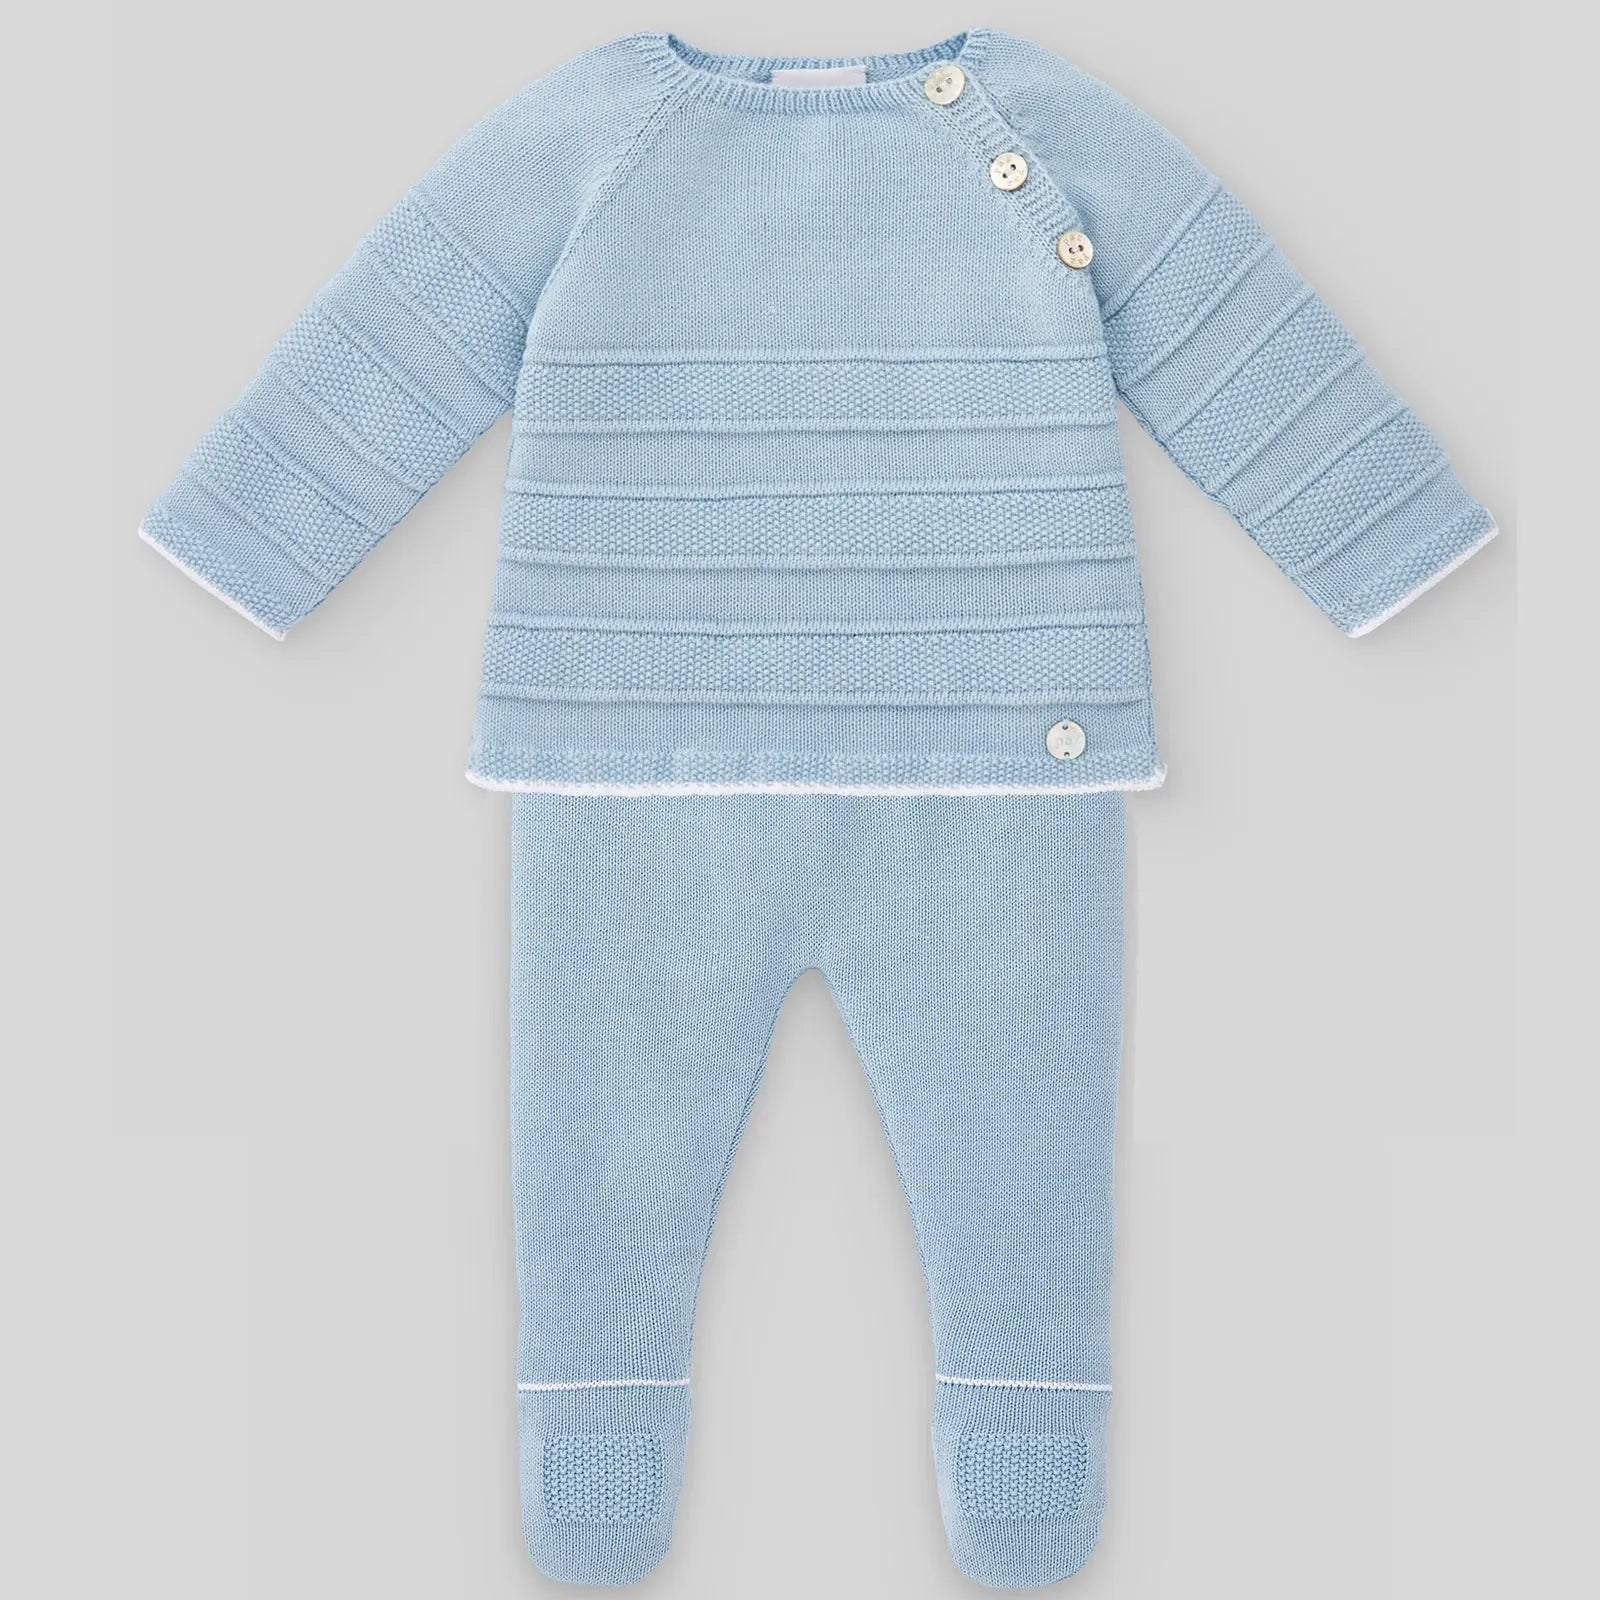 Blue Almonds Ltd Boy's Knitted Footed Set in Seaside Blue & White paz rodriguez